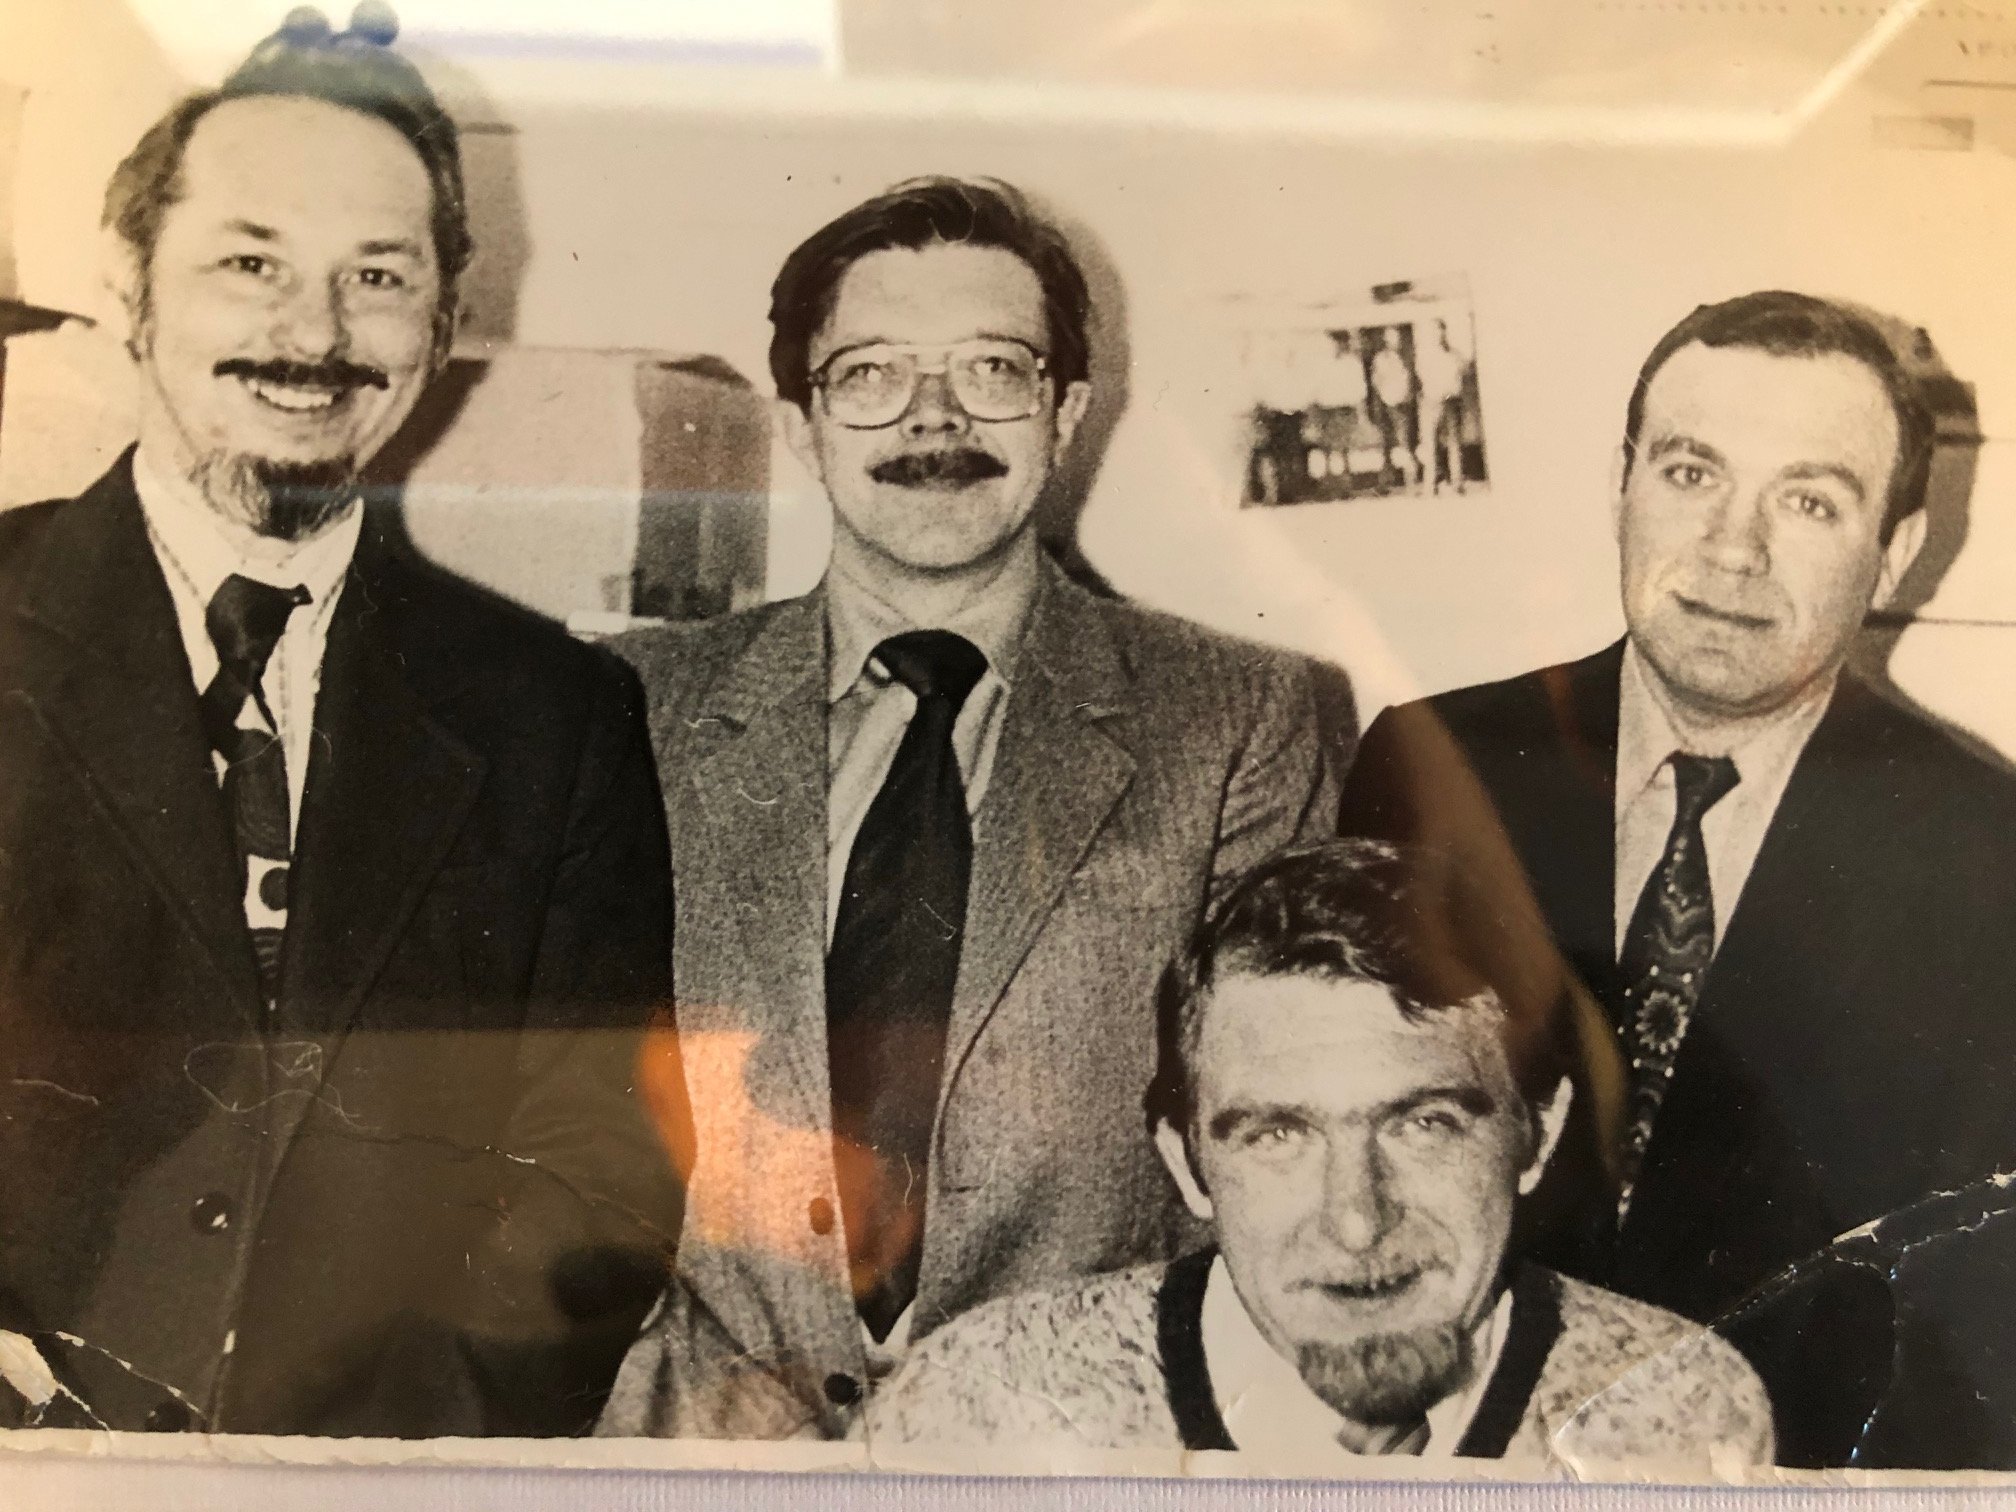 founding four machos, the late 1960s